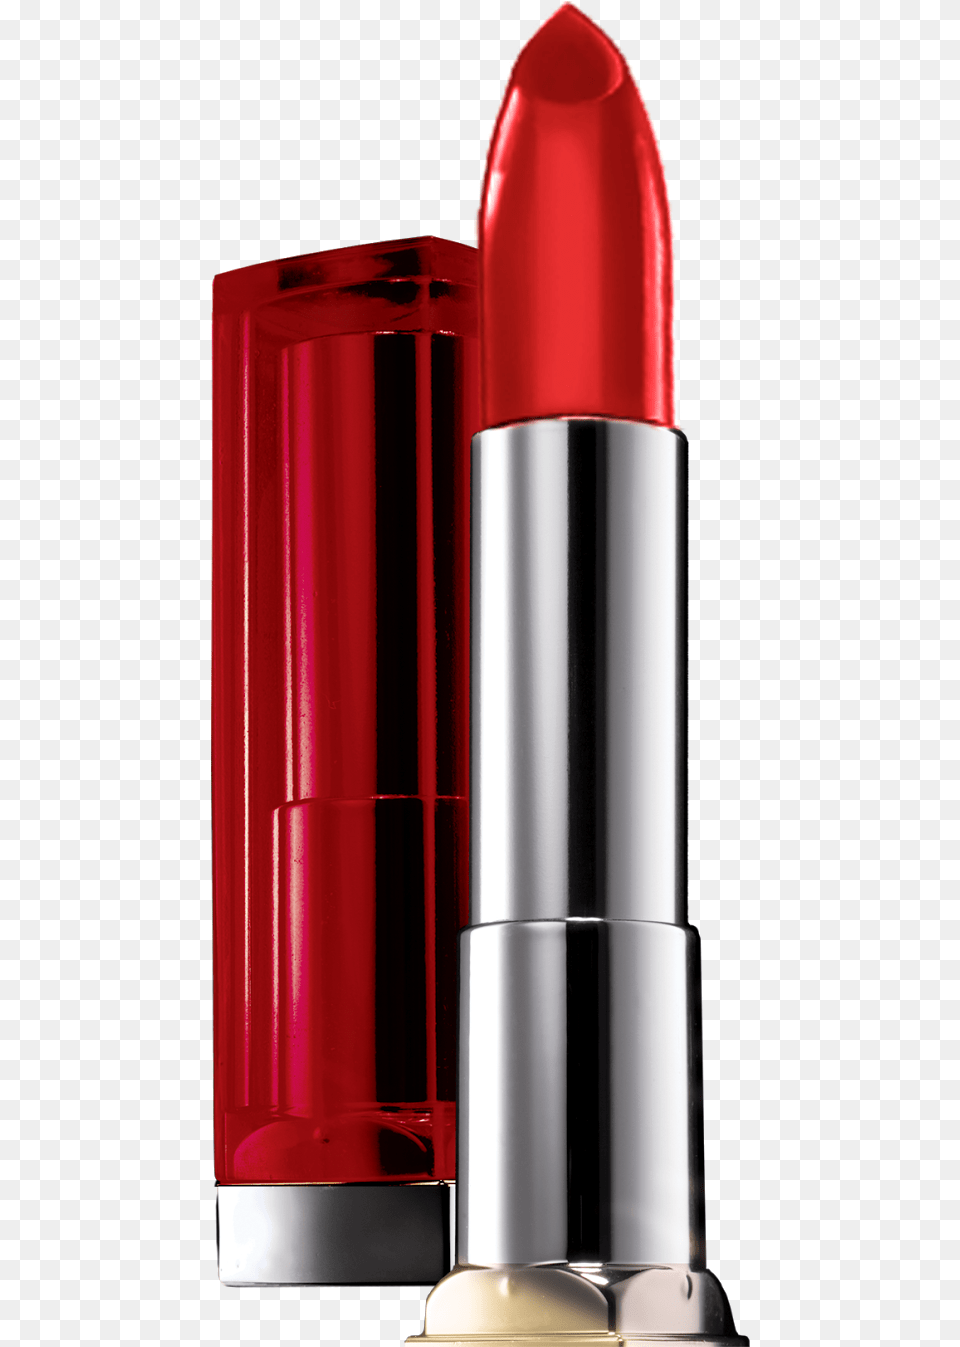 Download Maybelline Lipstick, Cosmetics Png Image